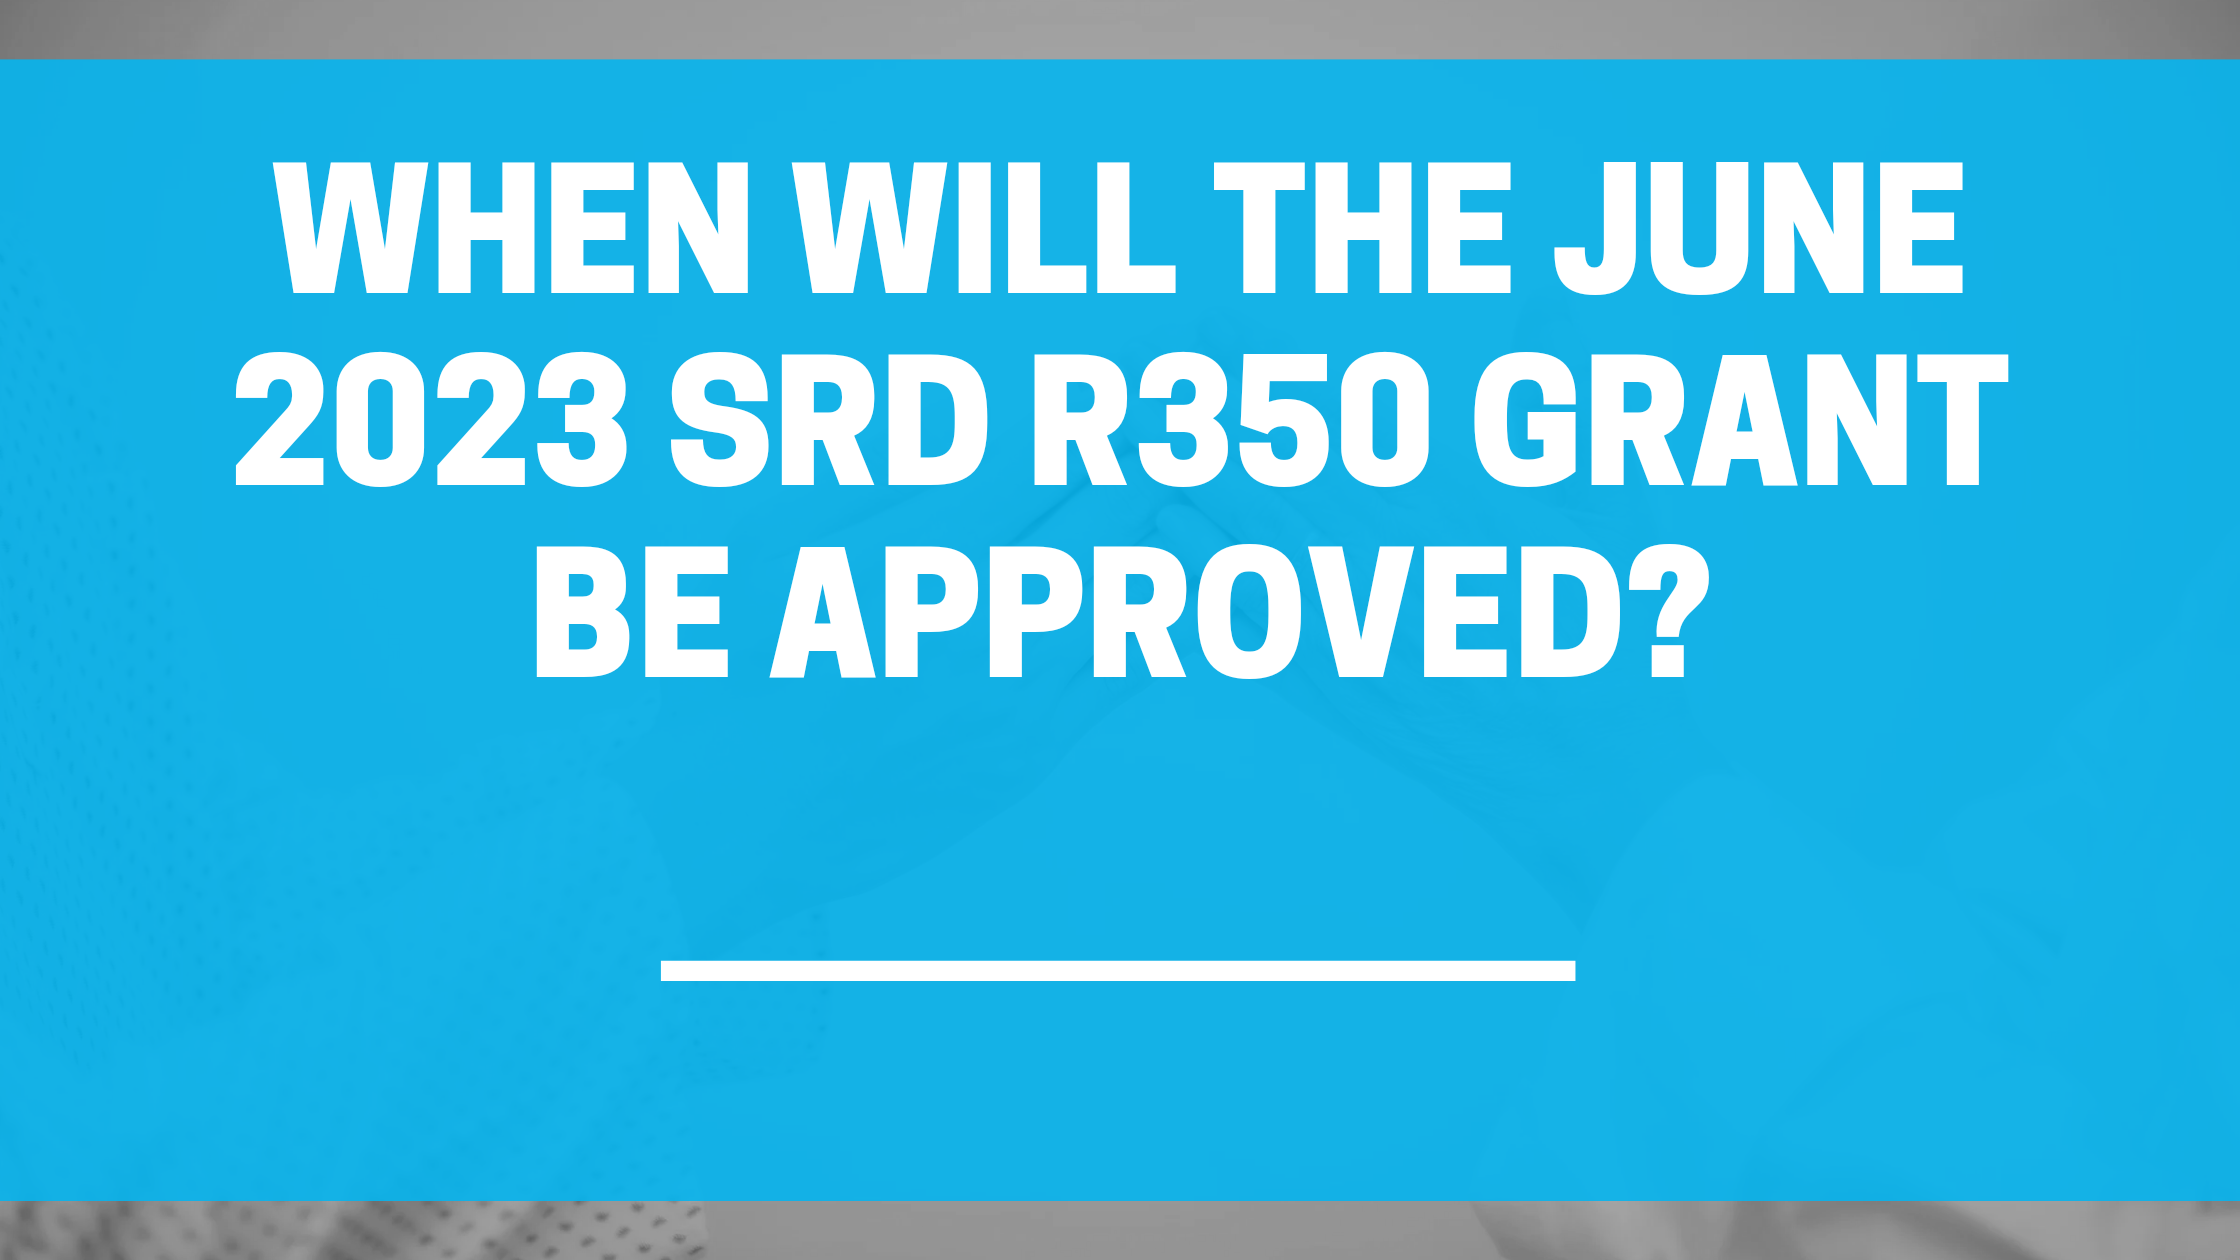 When Will the June 2023 SRD R350 Grant be Approved?